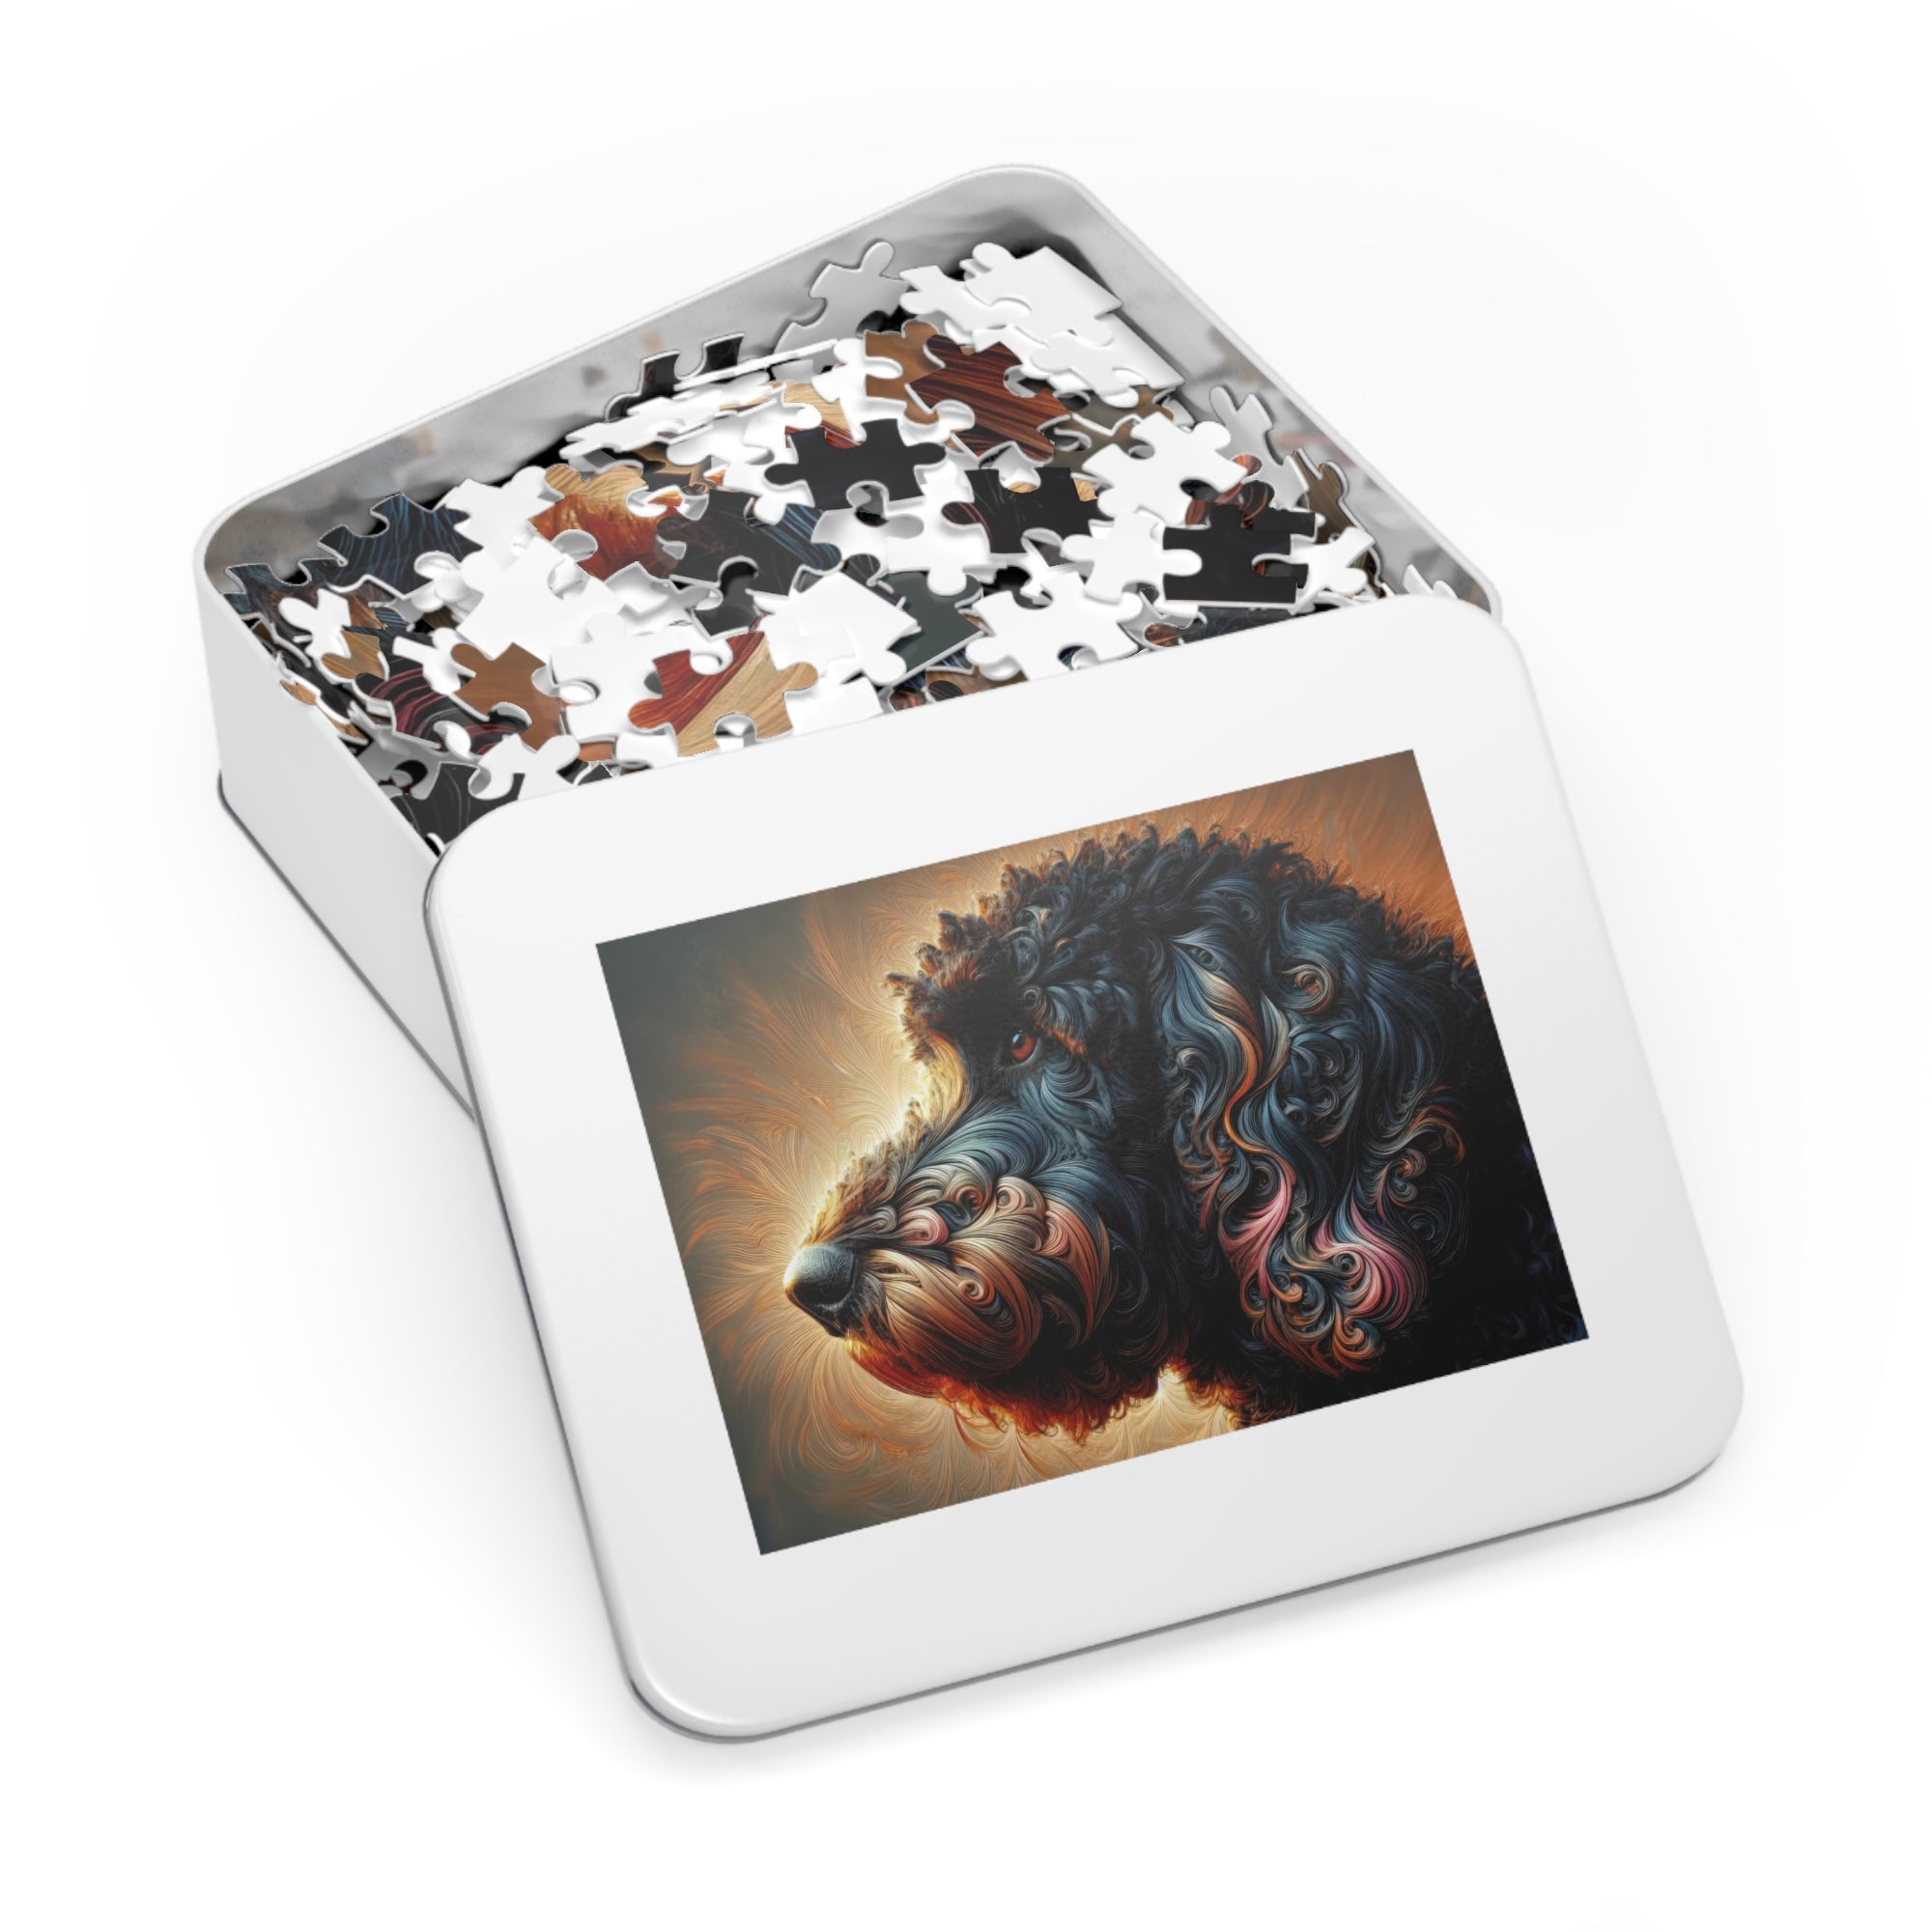 Opal's Whorled Whimsy Jigsaw Puzzle